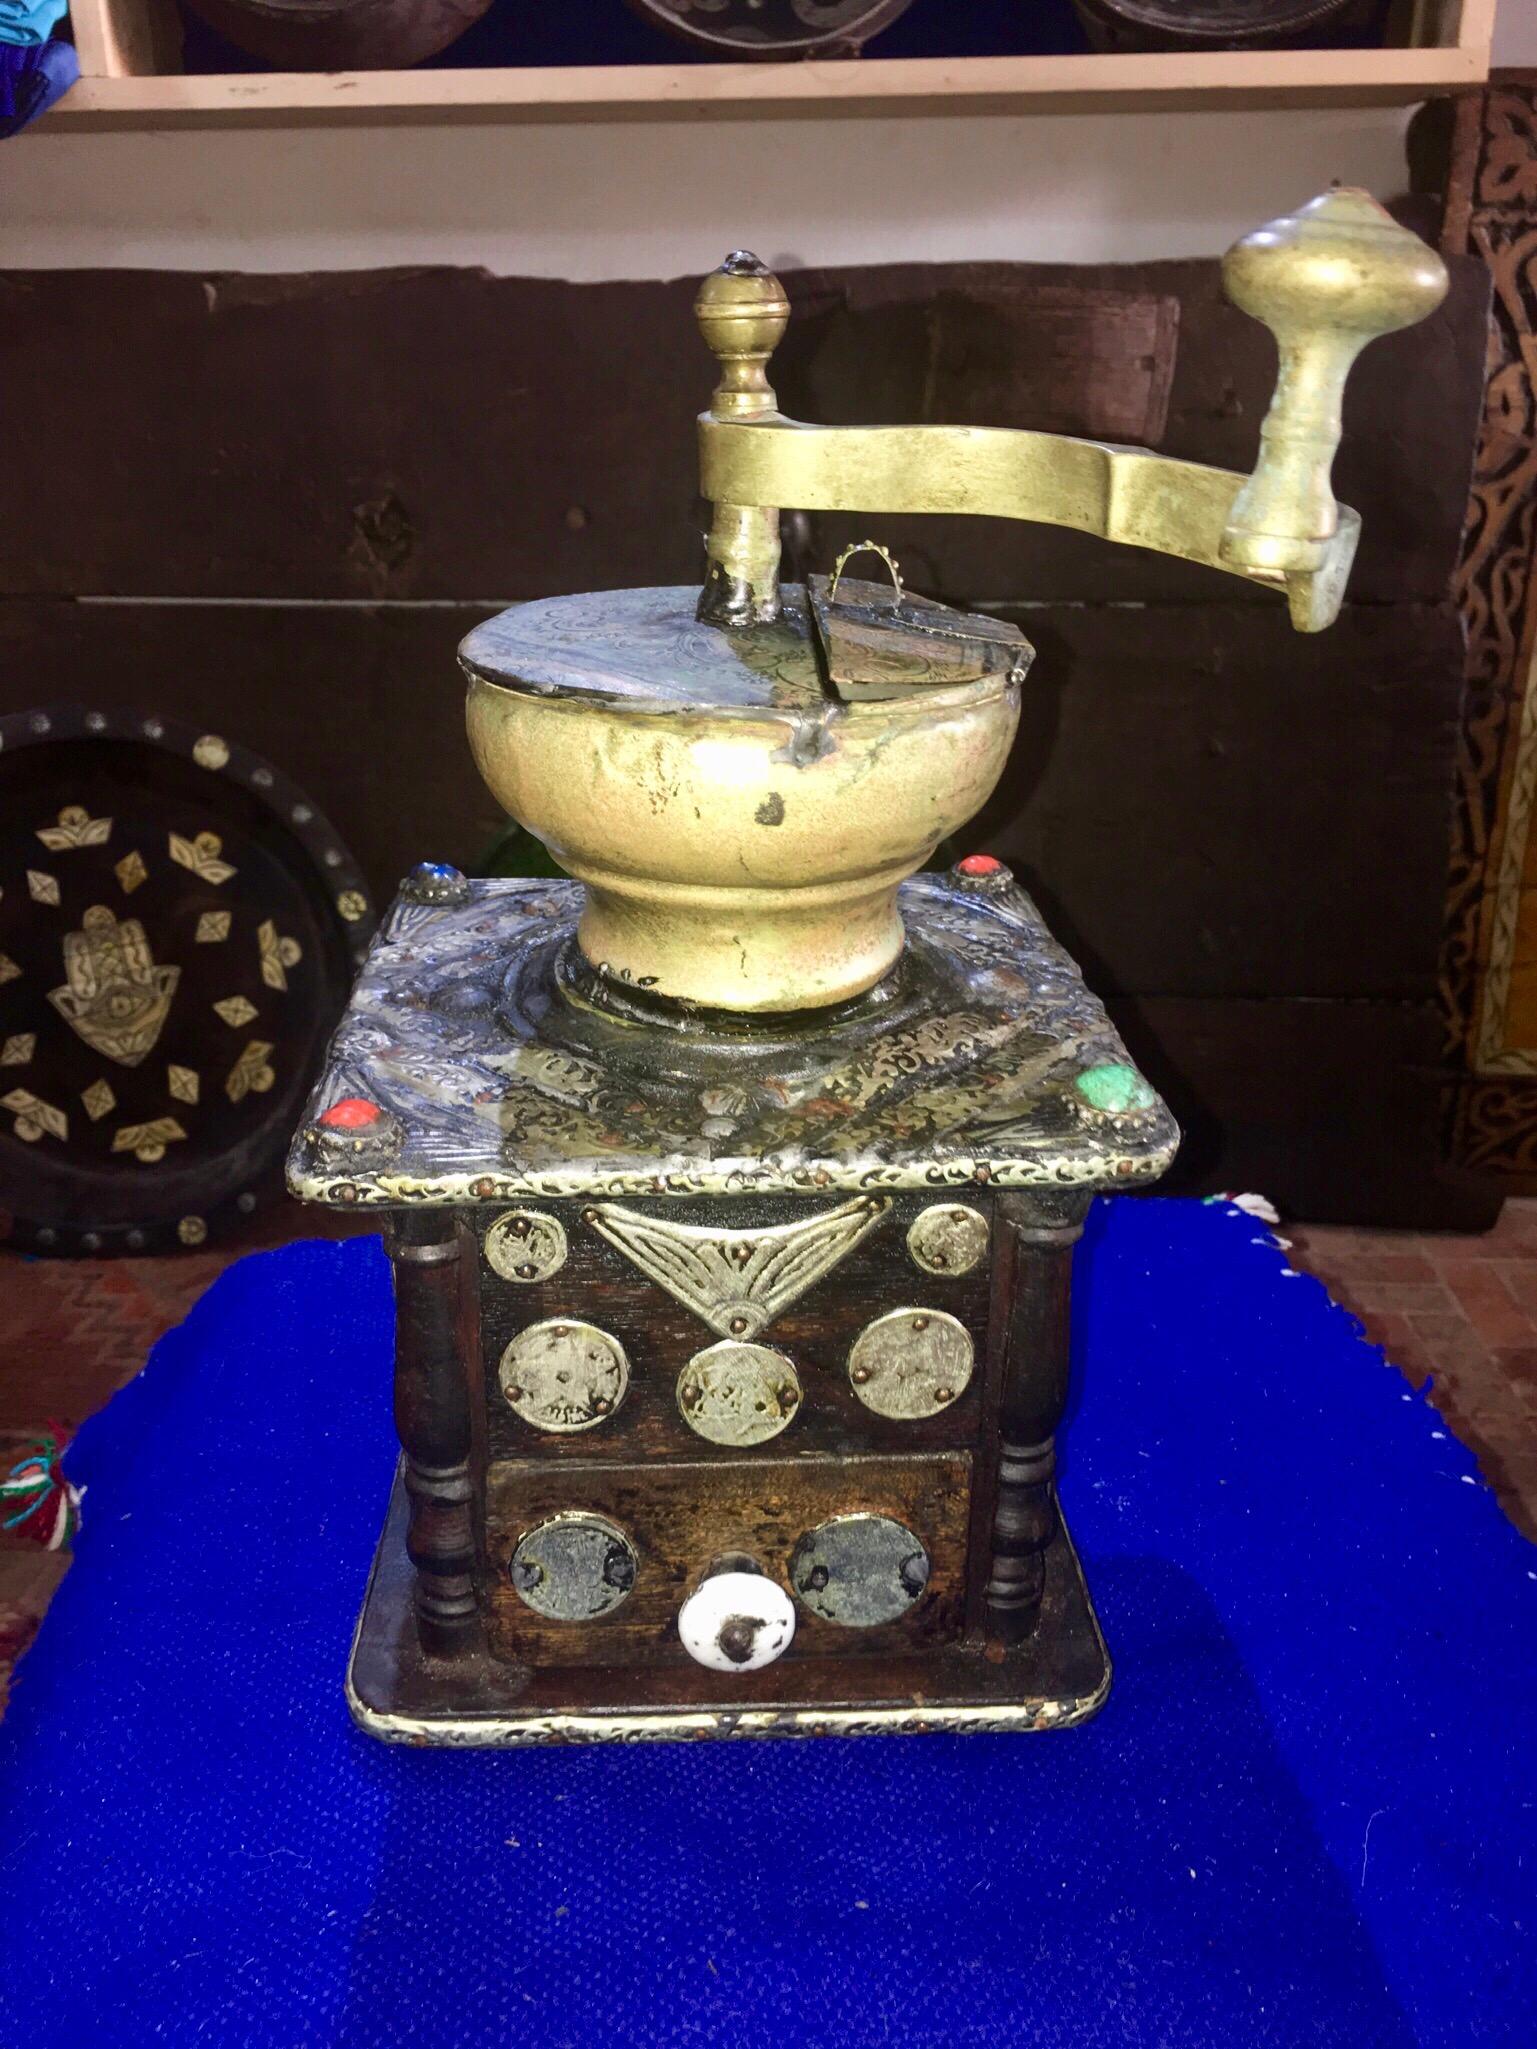 This antique hand-crank grinder is made of ebony wood, with hand-engraved silver melange adornment, hand carved camel bone embellishments, and numerous antique coins. Entirely handmade, this grinder was used by southern Morocco nomads while